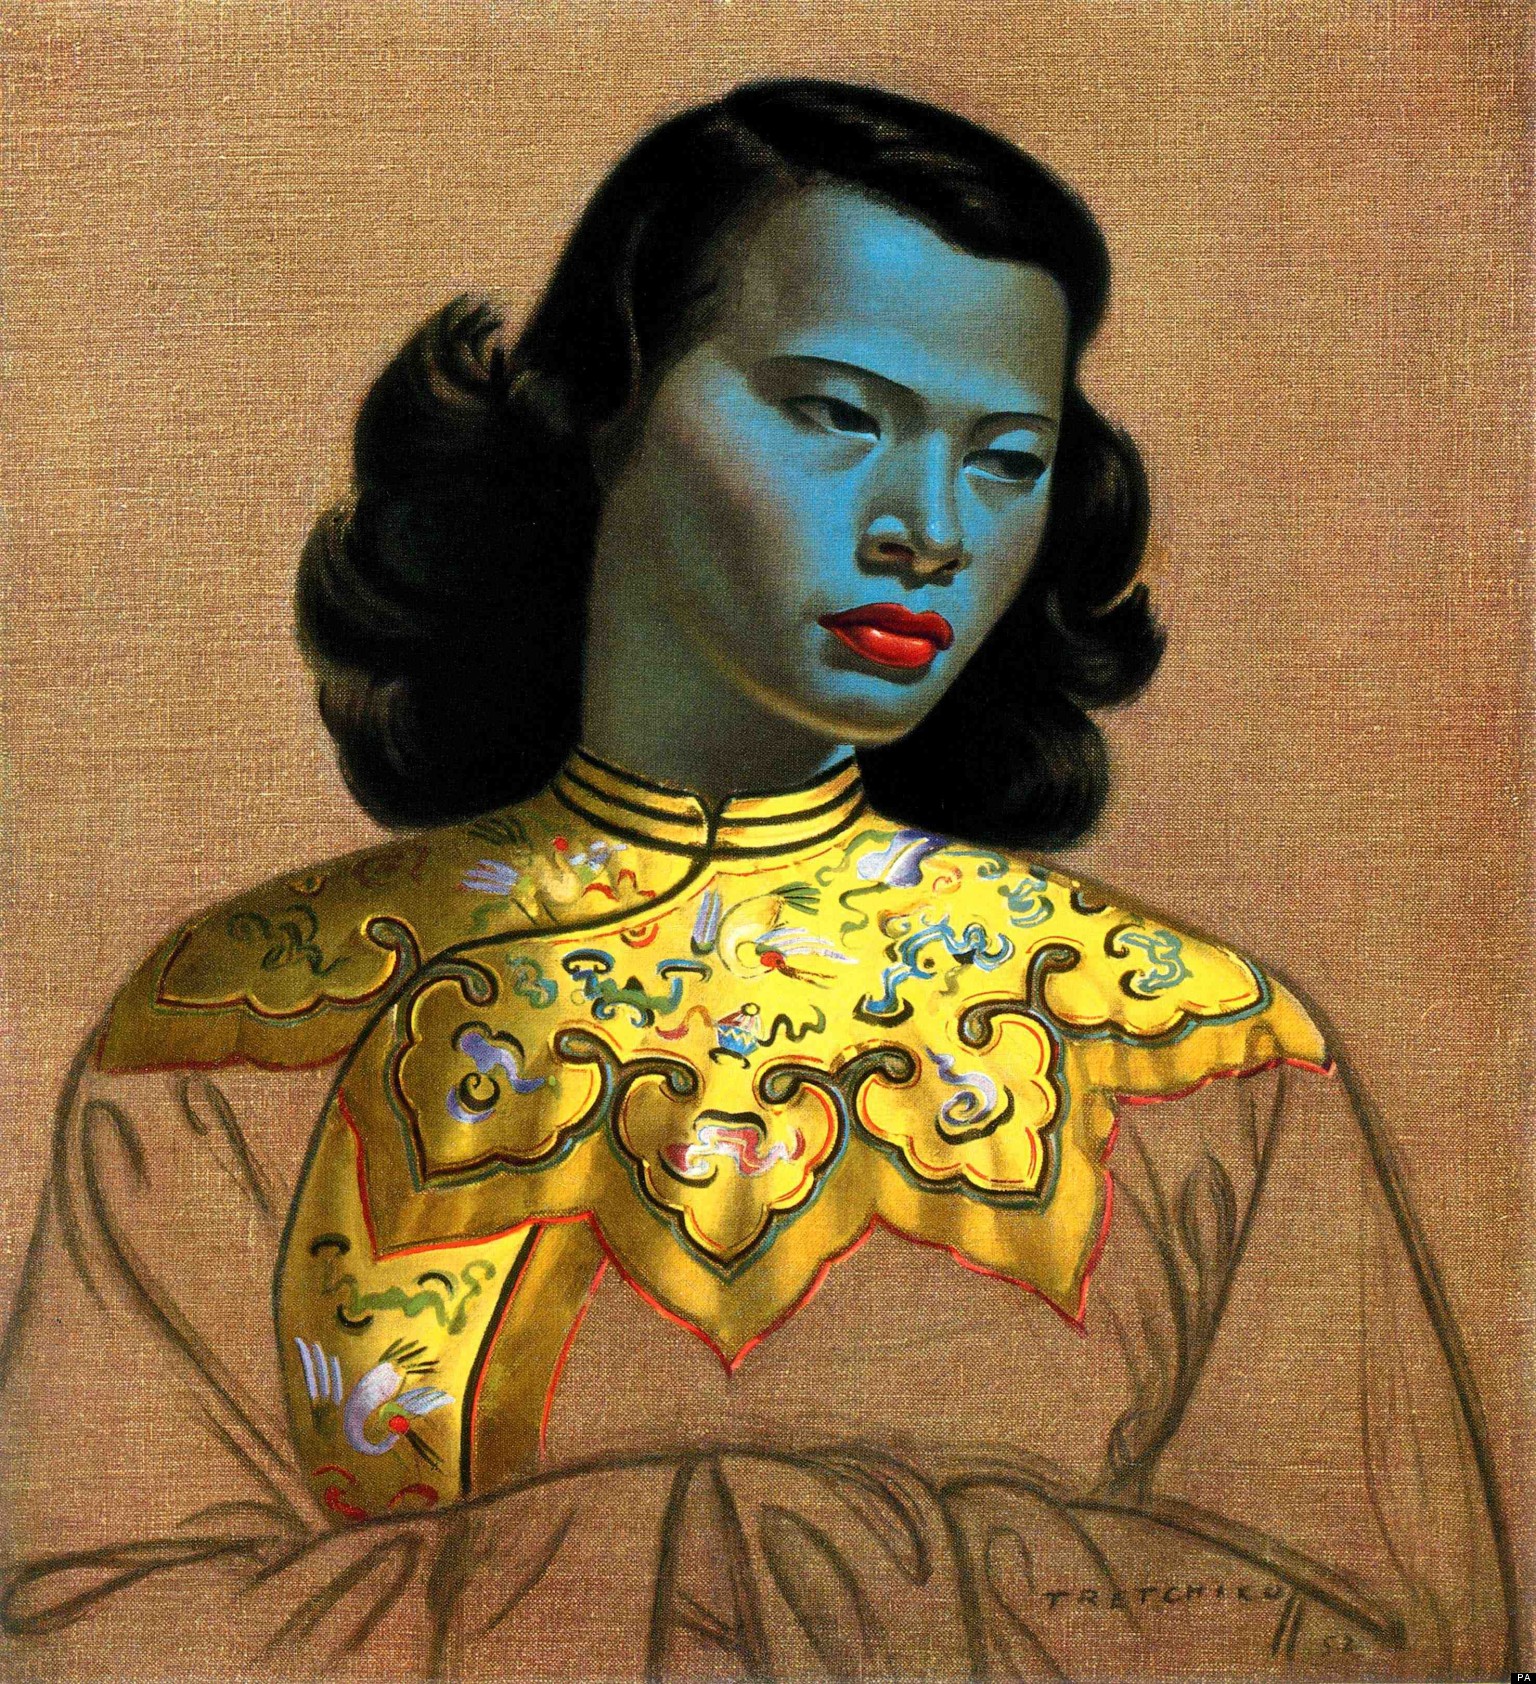 The Chinese Girl (The Green Lady), Vladimir Tretchikoff, 1952.